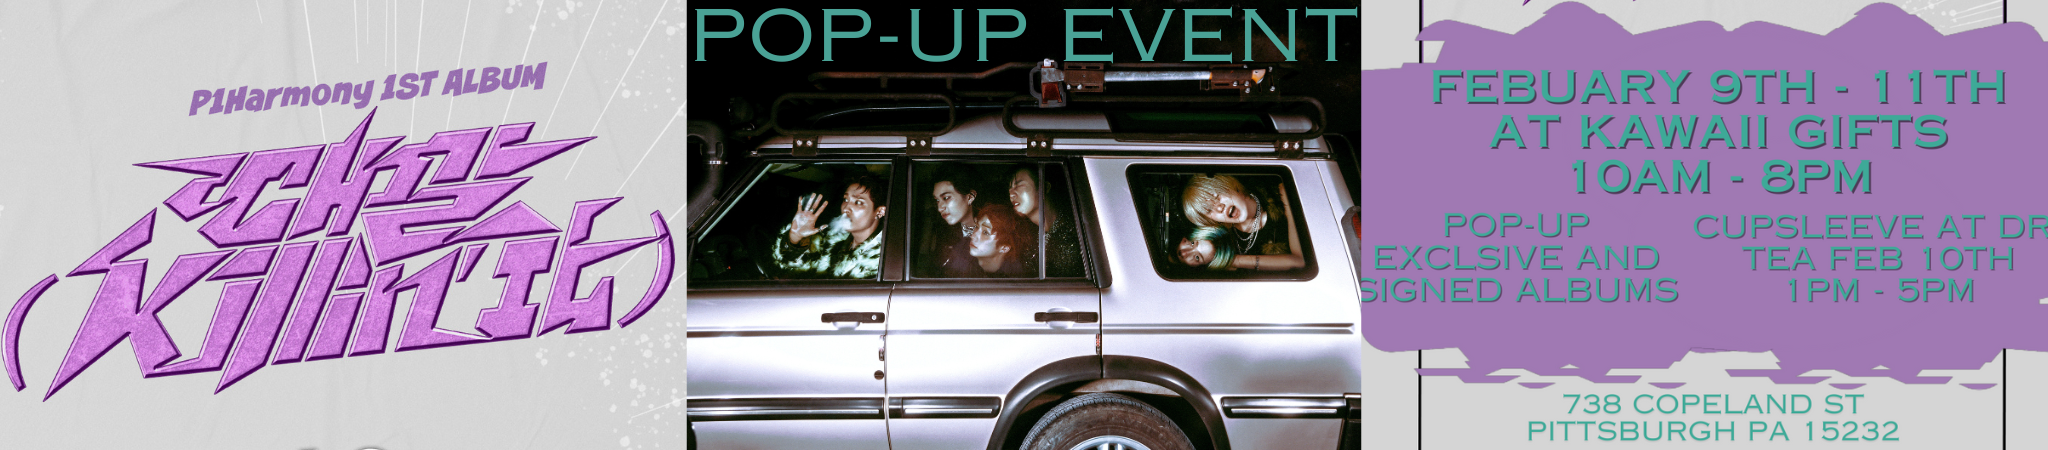 POp-Up_Event.png